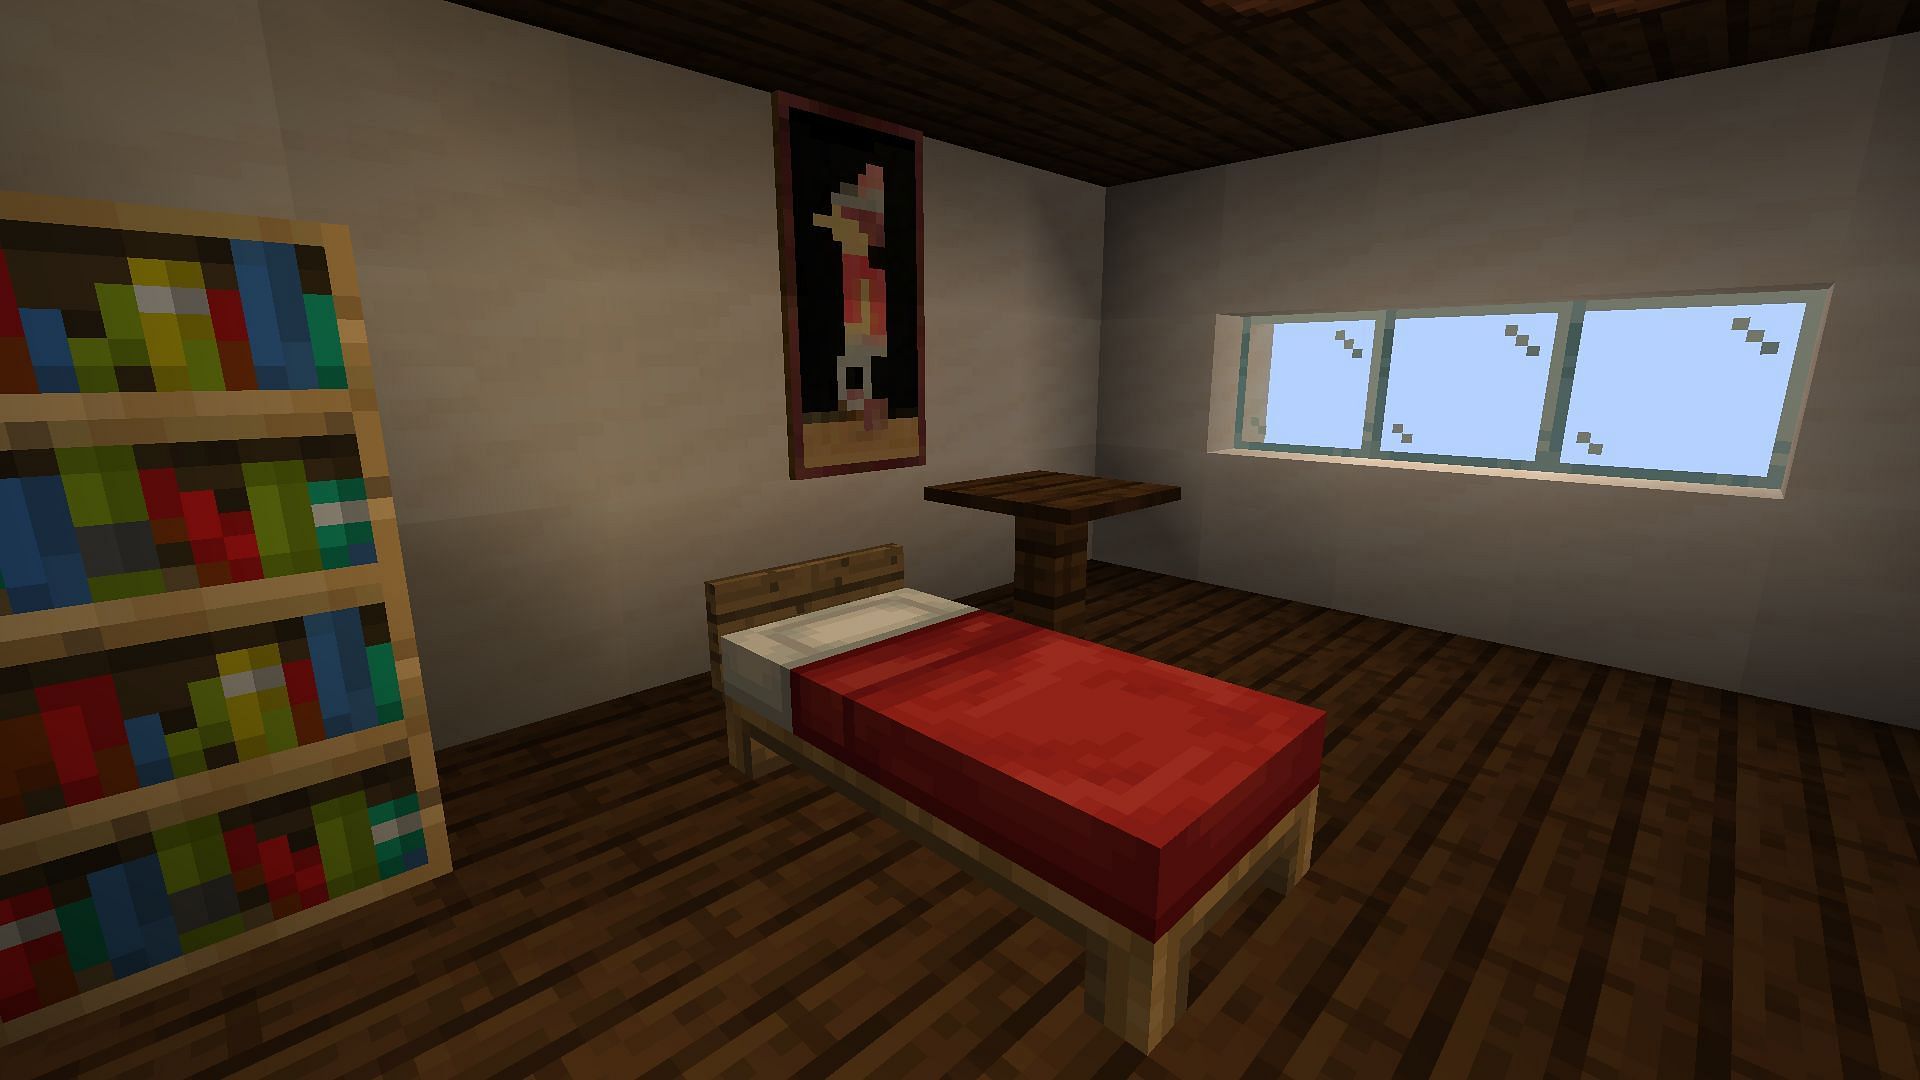 Beds are important for progressing time in Minecraft (Image via Qwizibo3493/Reddit)